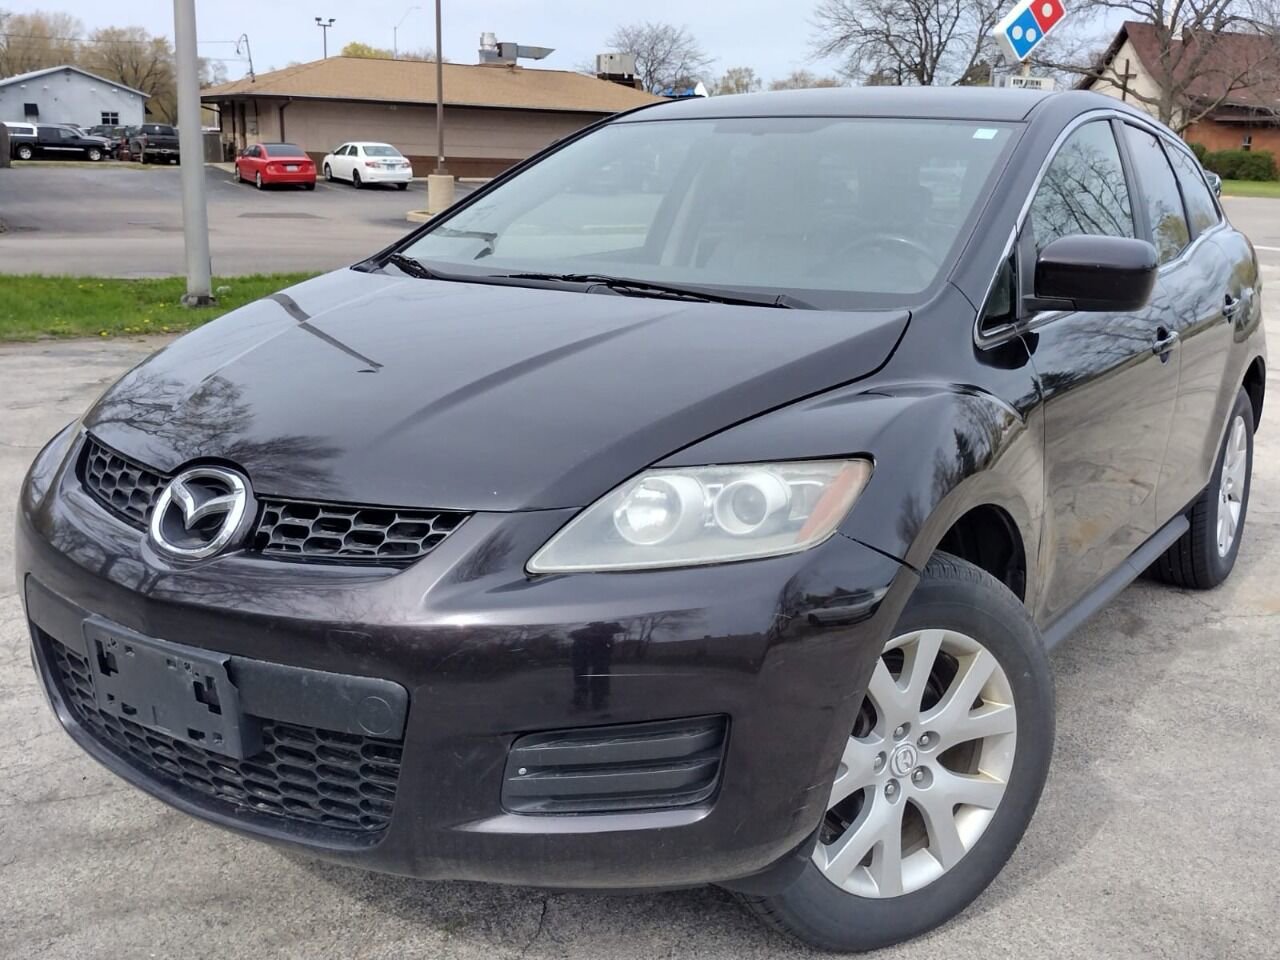 Used MAZDA CX-7 for Sale Right Now - Autotrader